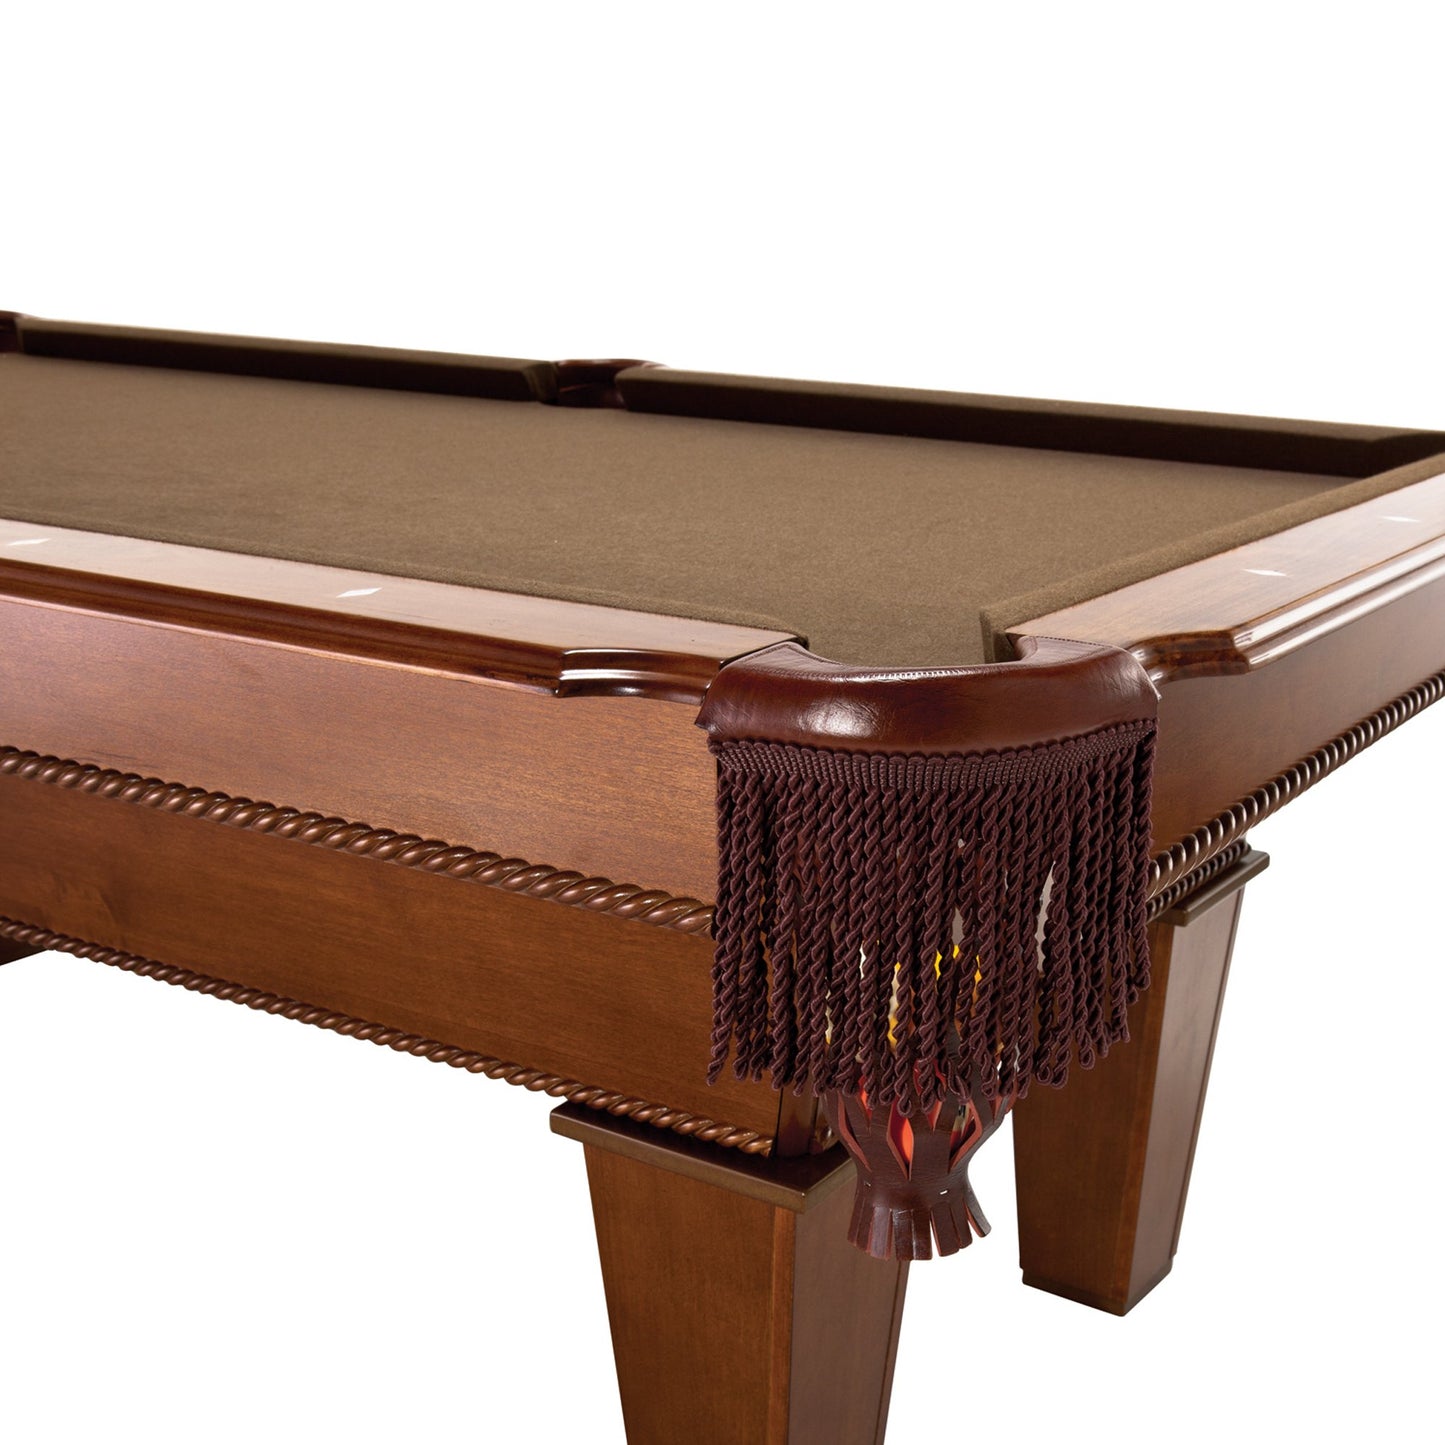 Fat Cat Frisco 7ft Billiard Table with Accessories - Gaming Blaze